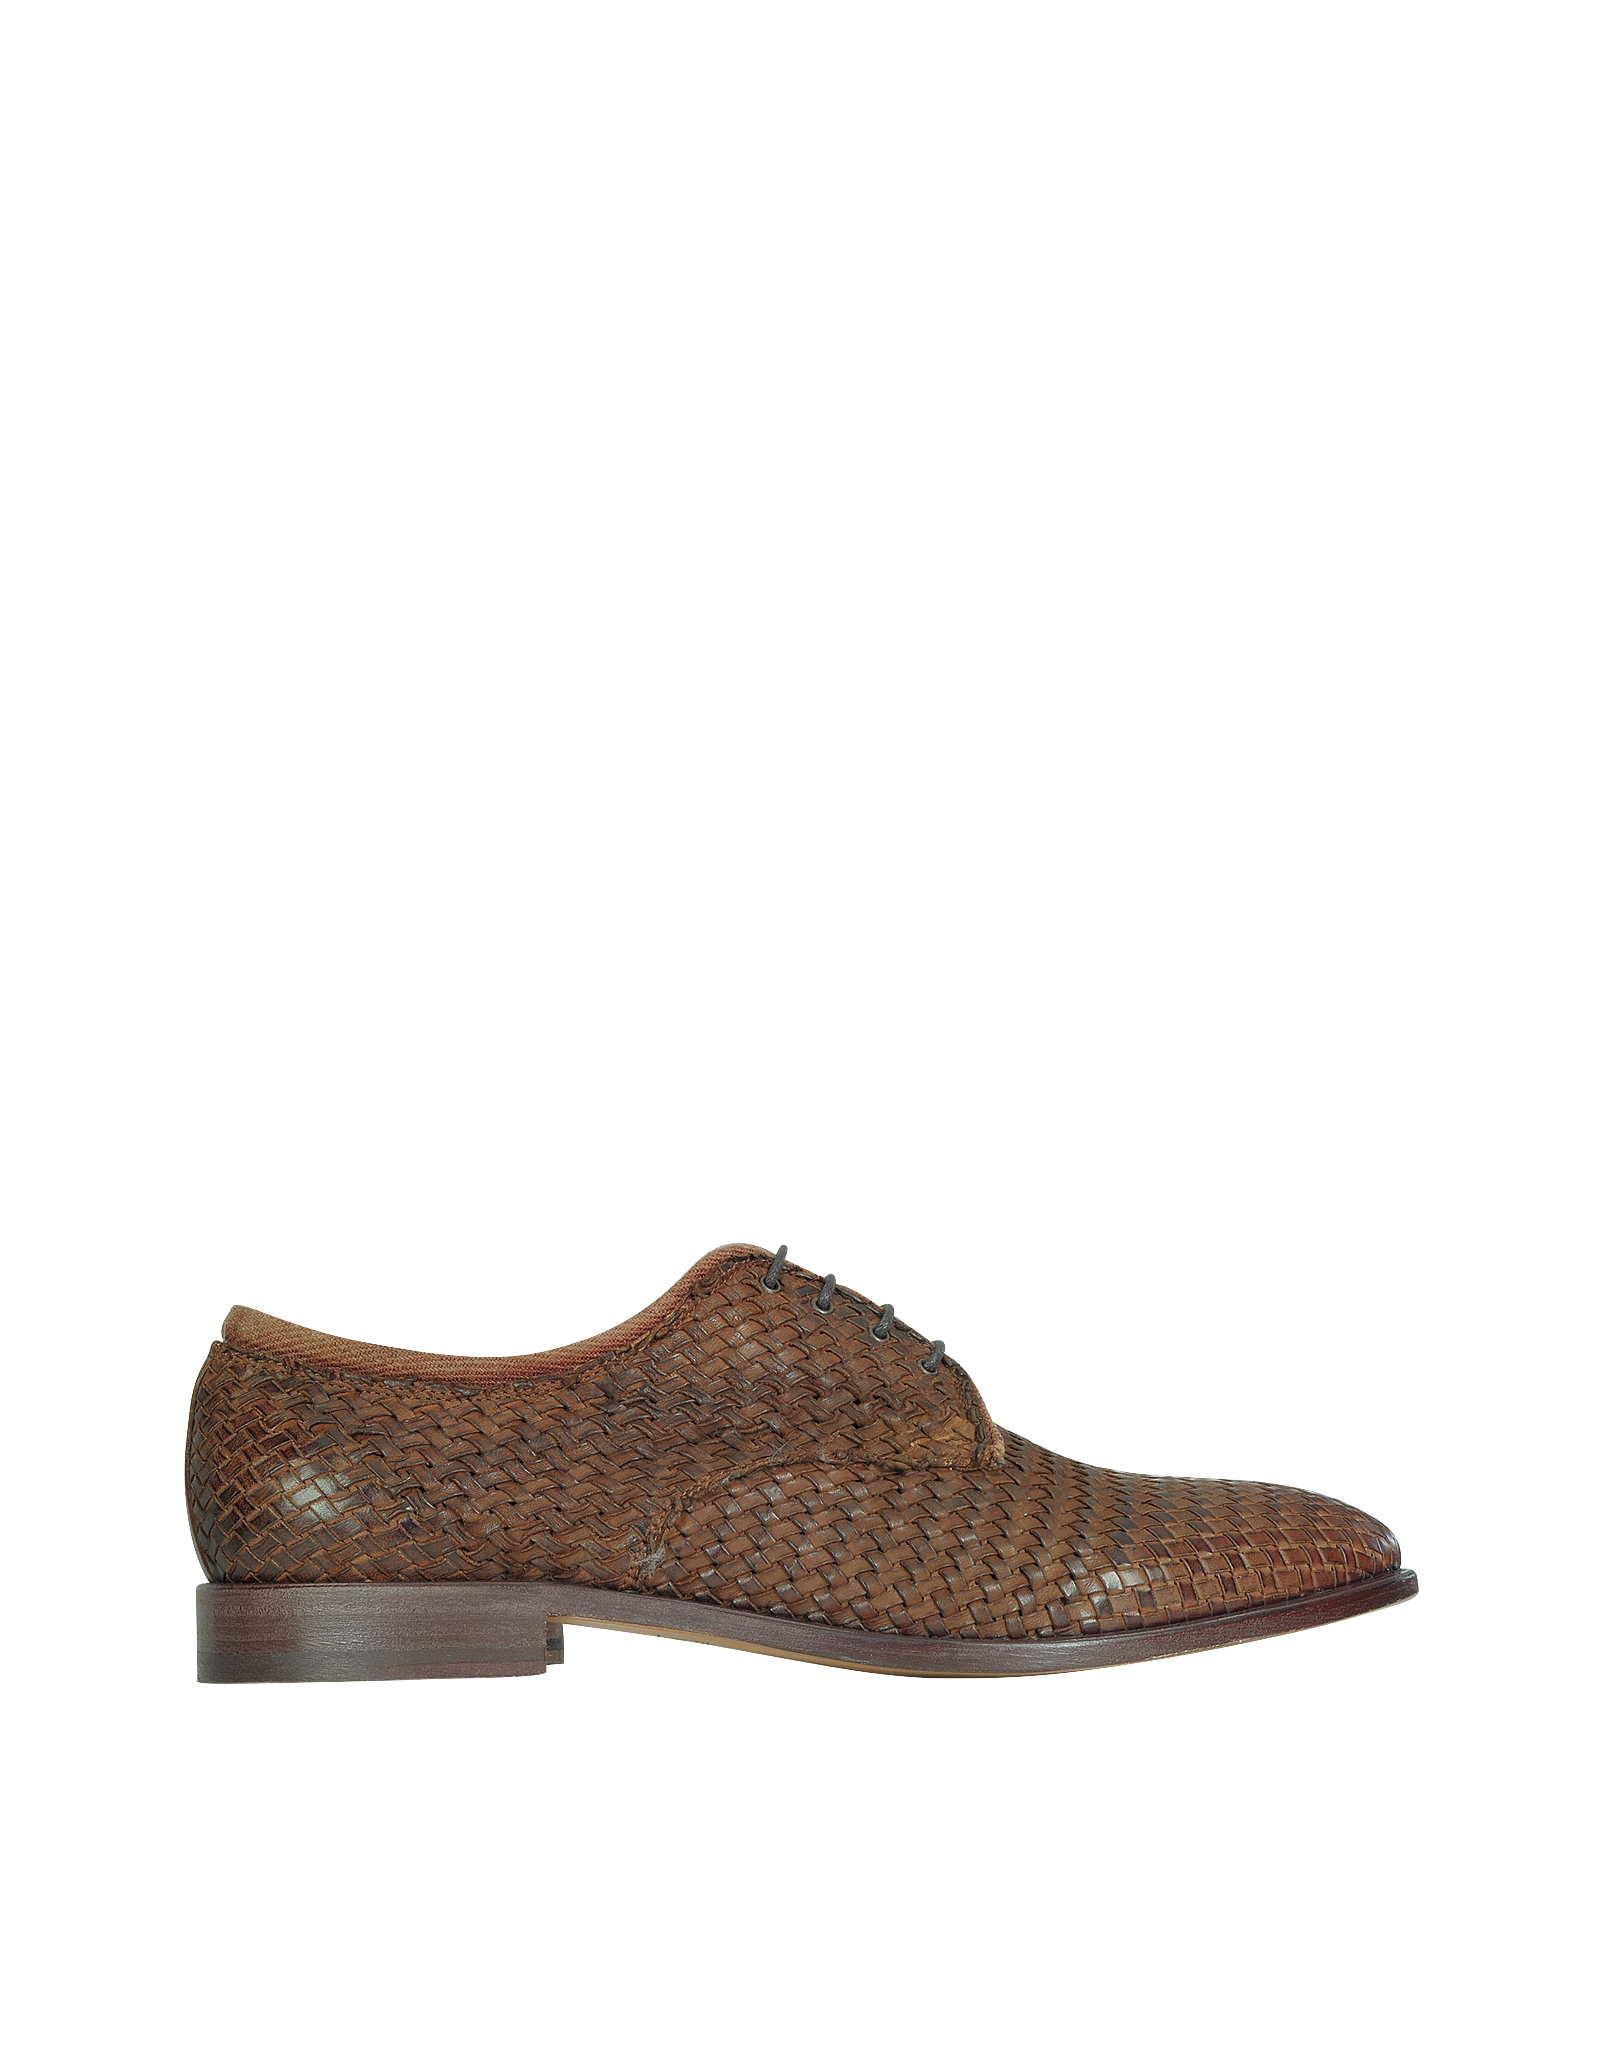 Lyst - Fratelli Rossetti Derby Brown Woven Leather Shoes in Brown for Men